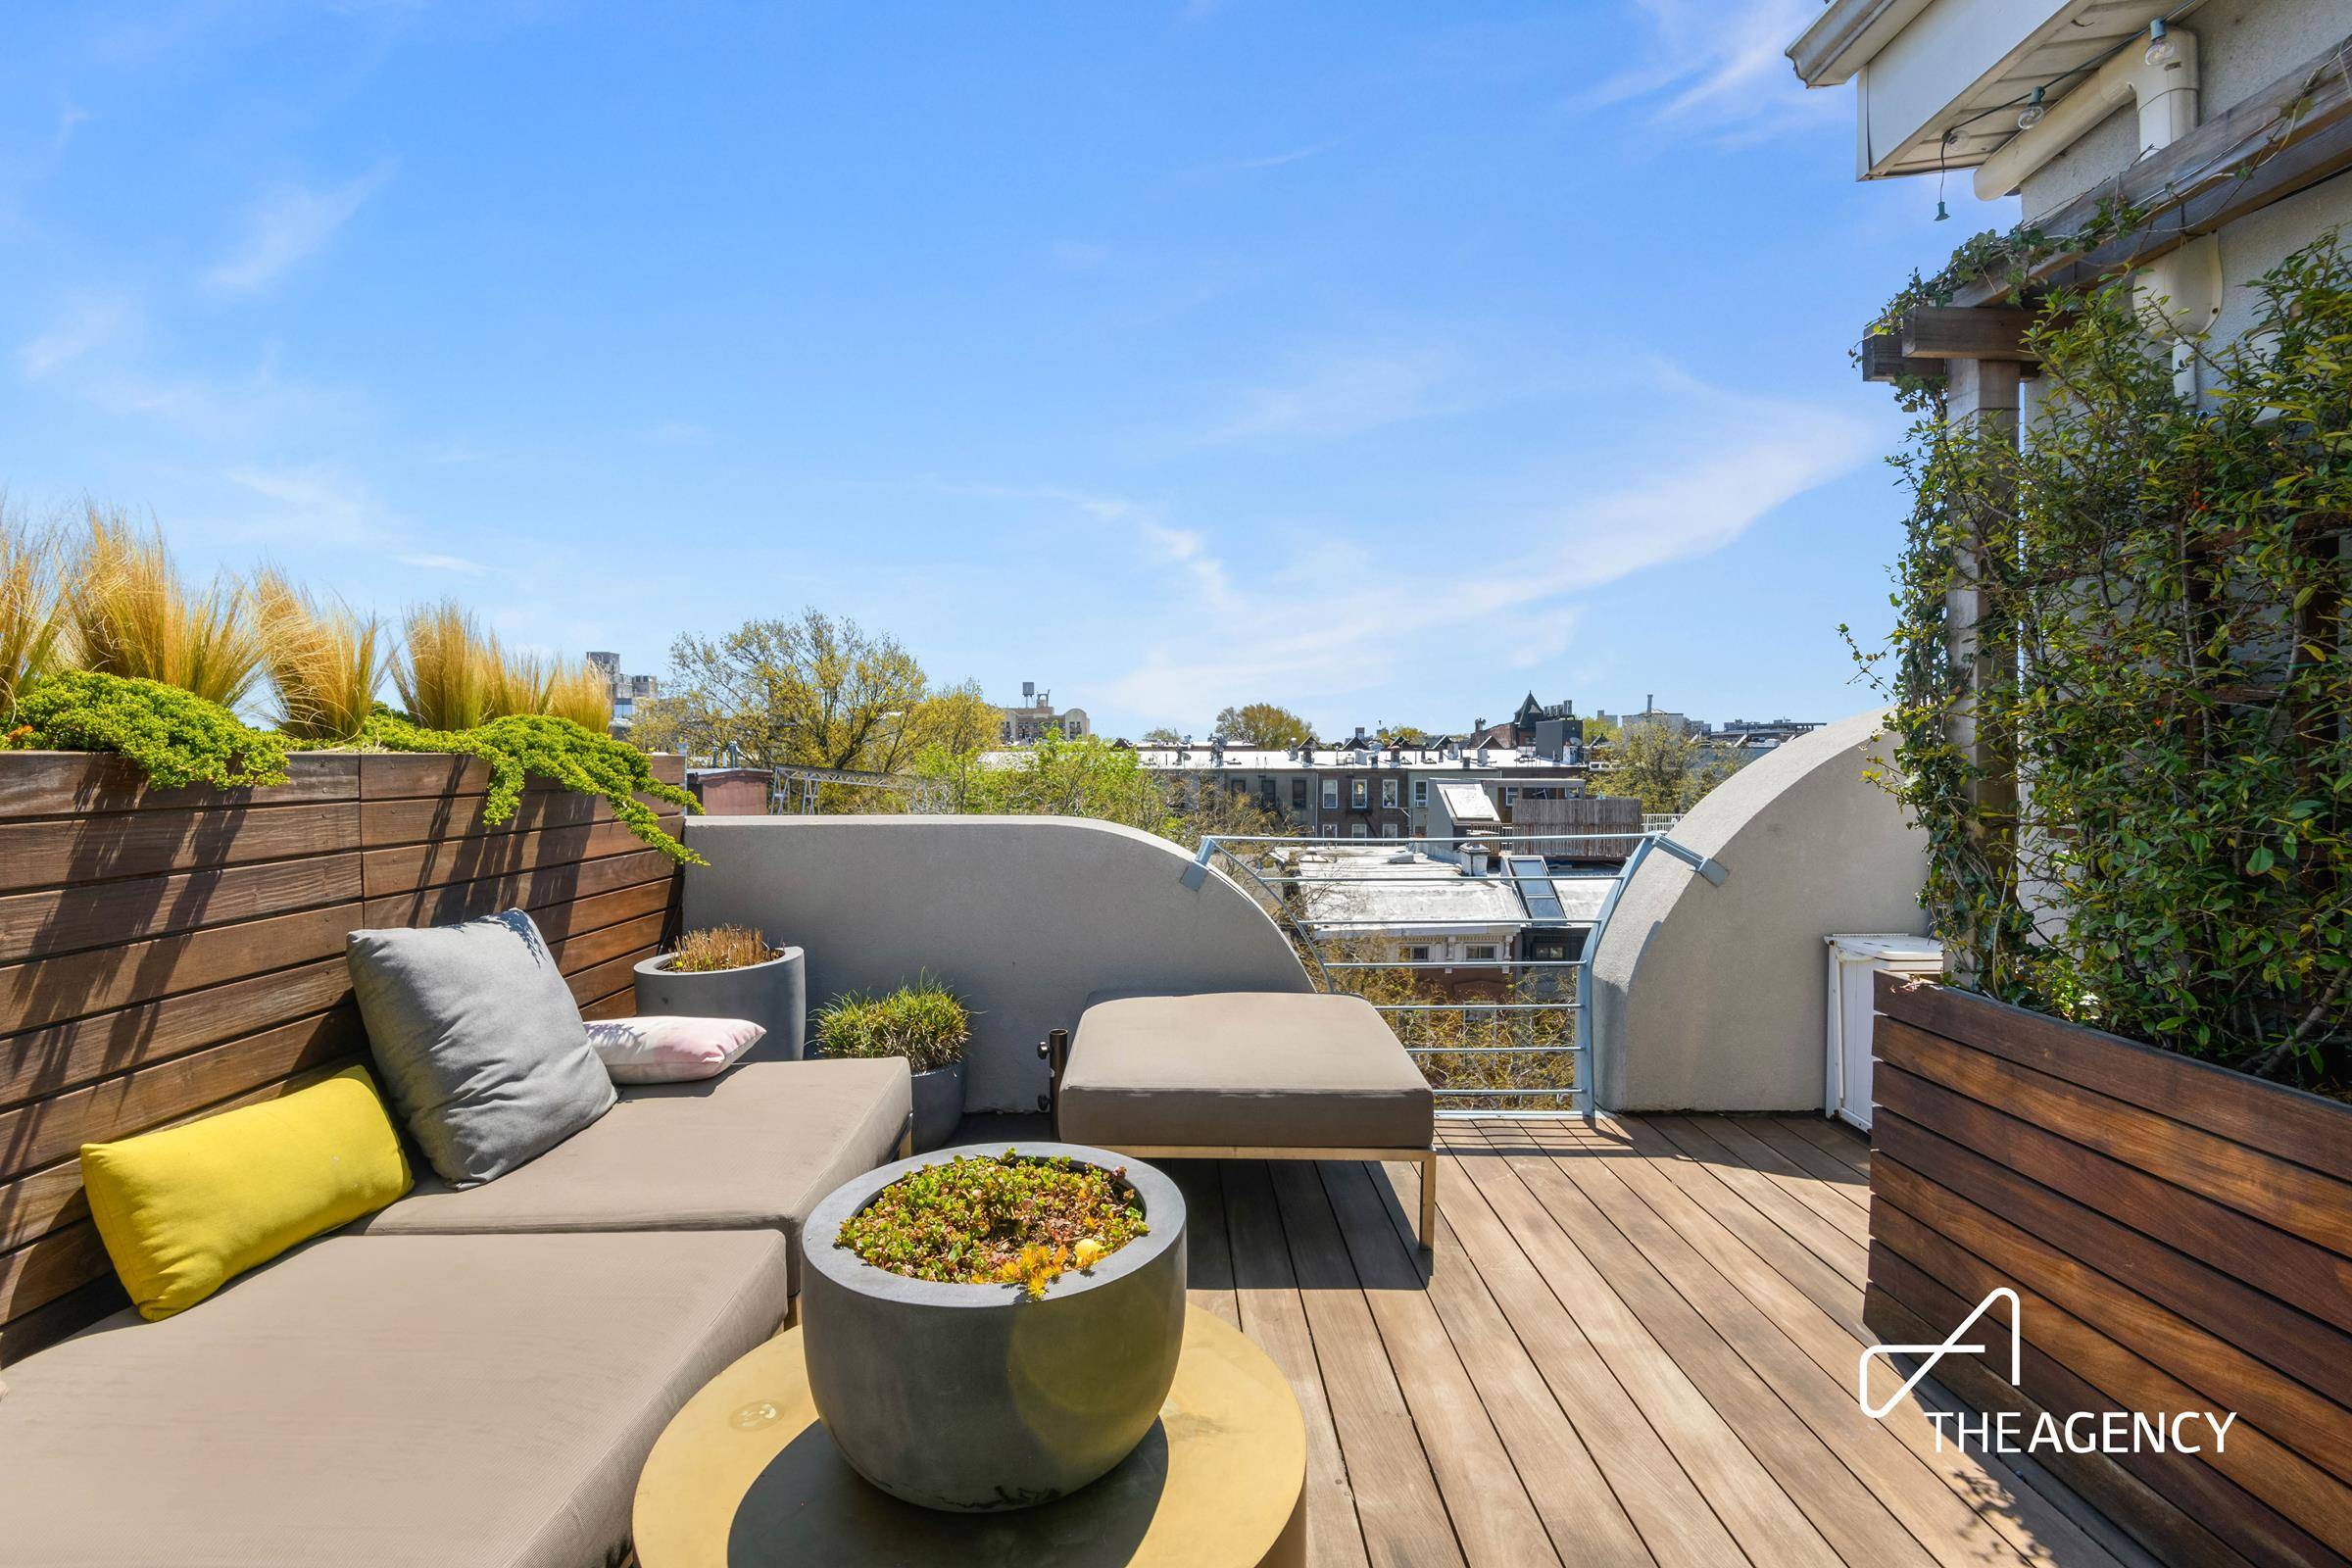 Worship the sun in this duplex penthouse paradise with skylights, southern light and 260 sq.